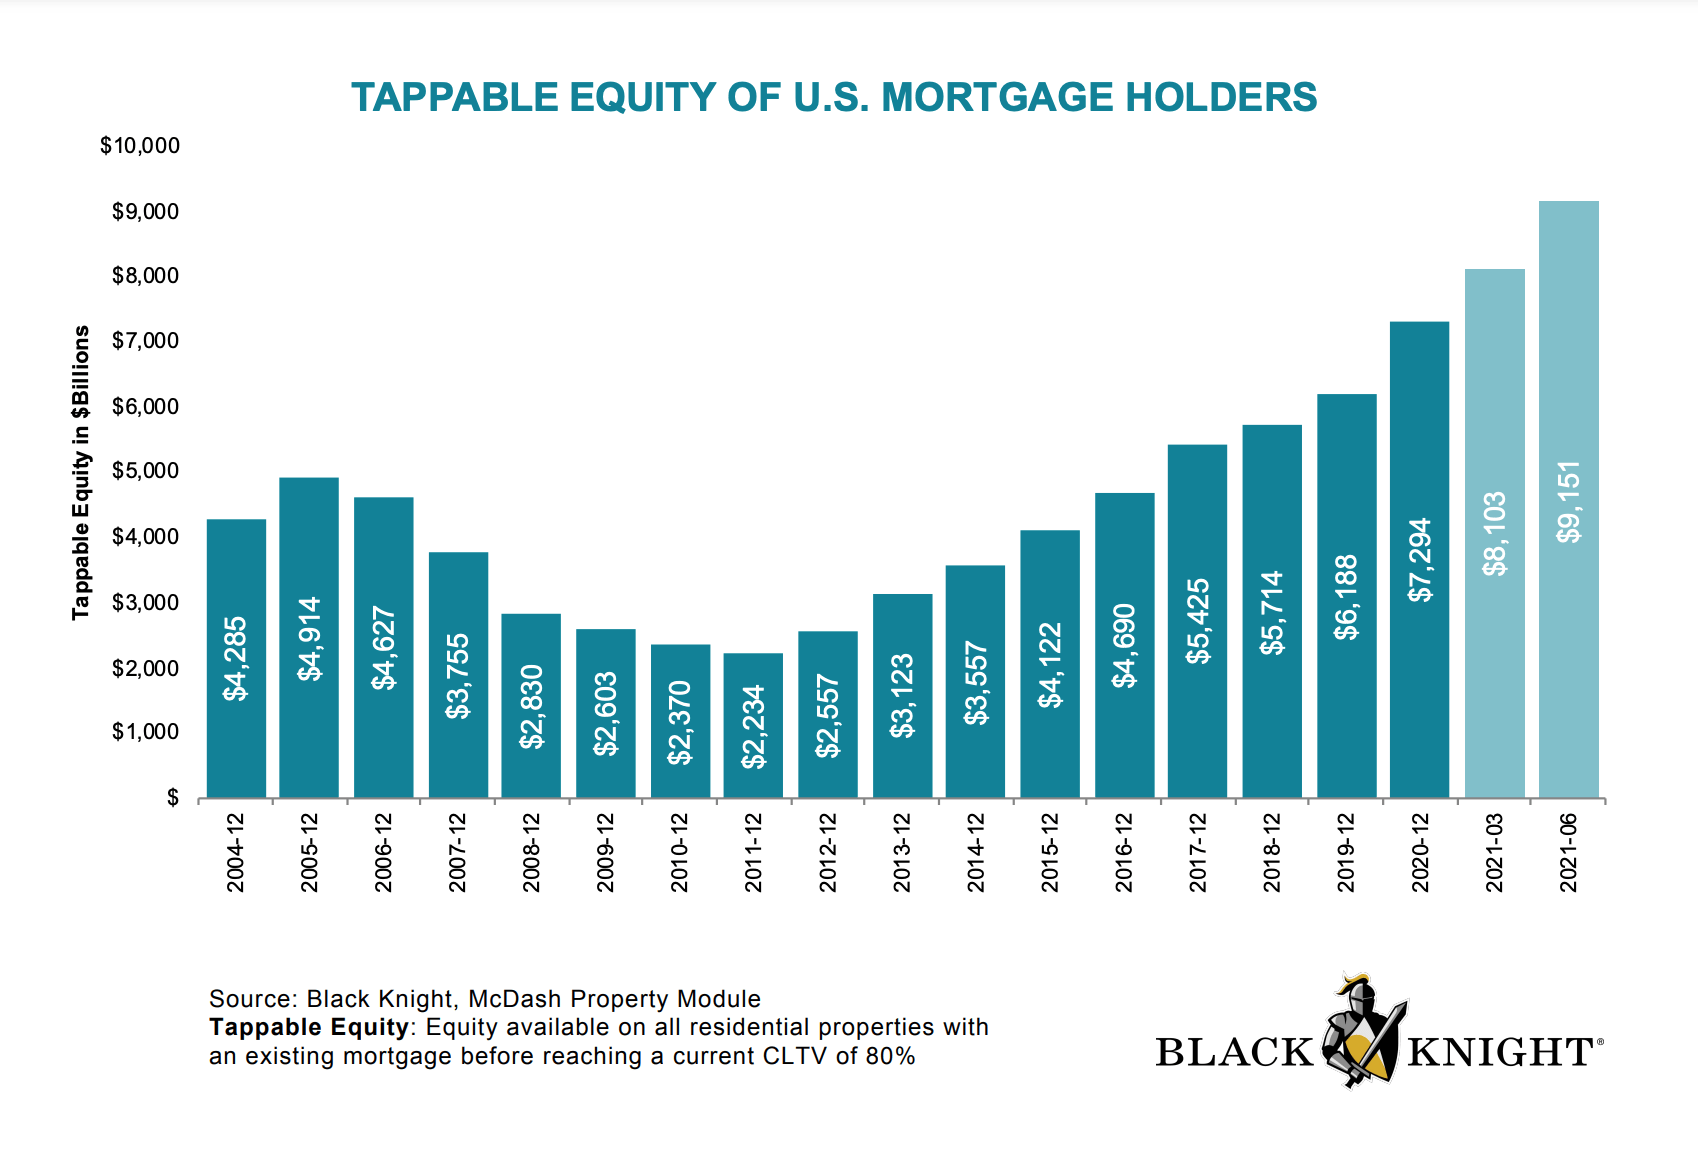 Black Knight Tappable Equity 2Q 2021 - $9.1 trillion - The Basis Point